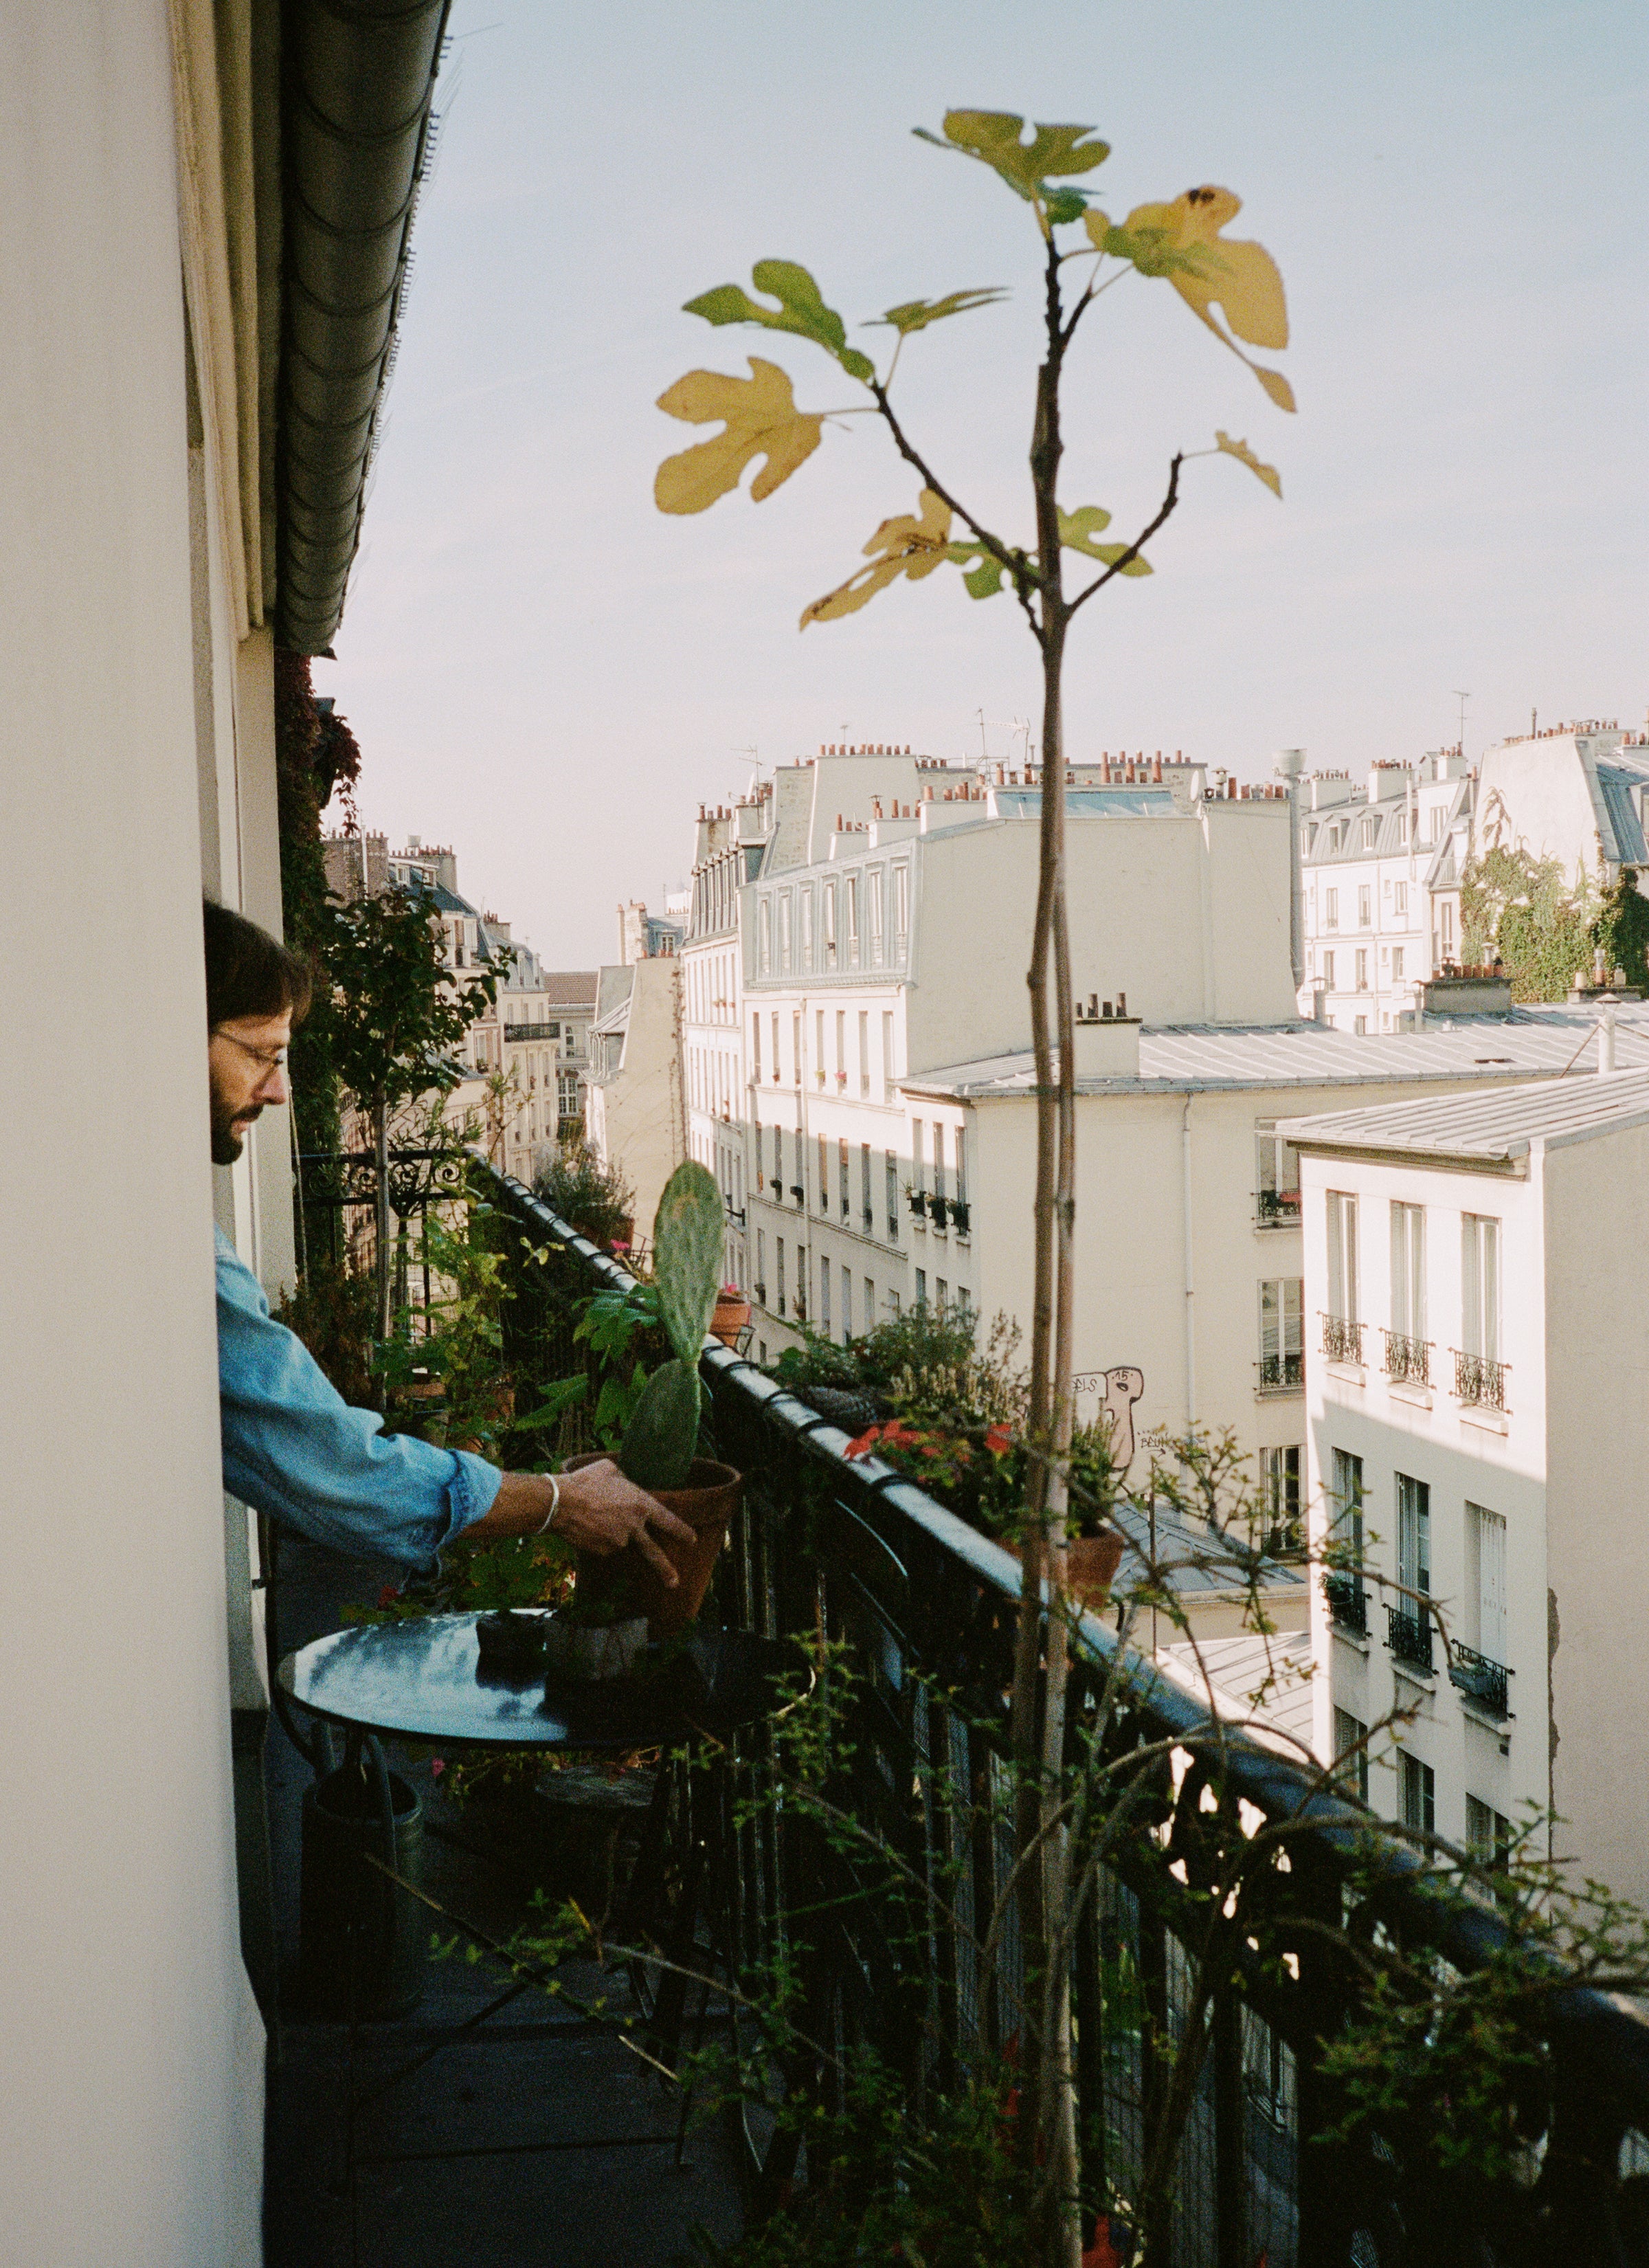 A photograph of Mathias and Geoffery’s balcony filled with plants and the city buildings as background.